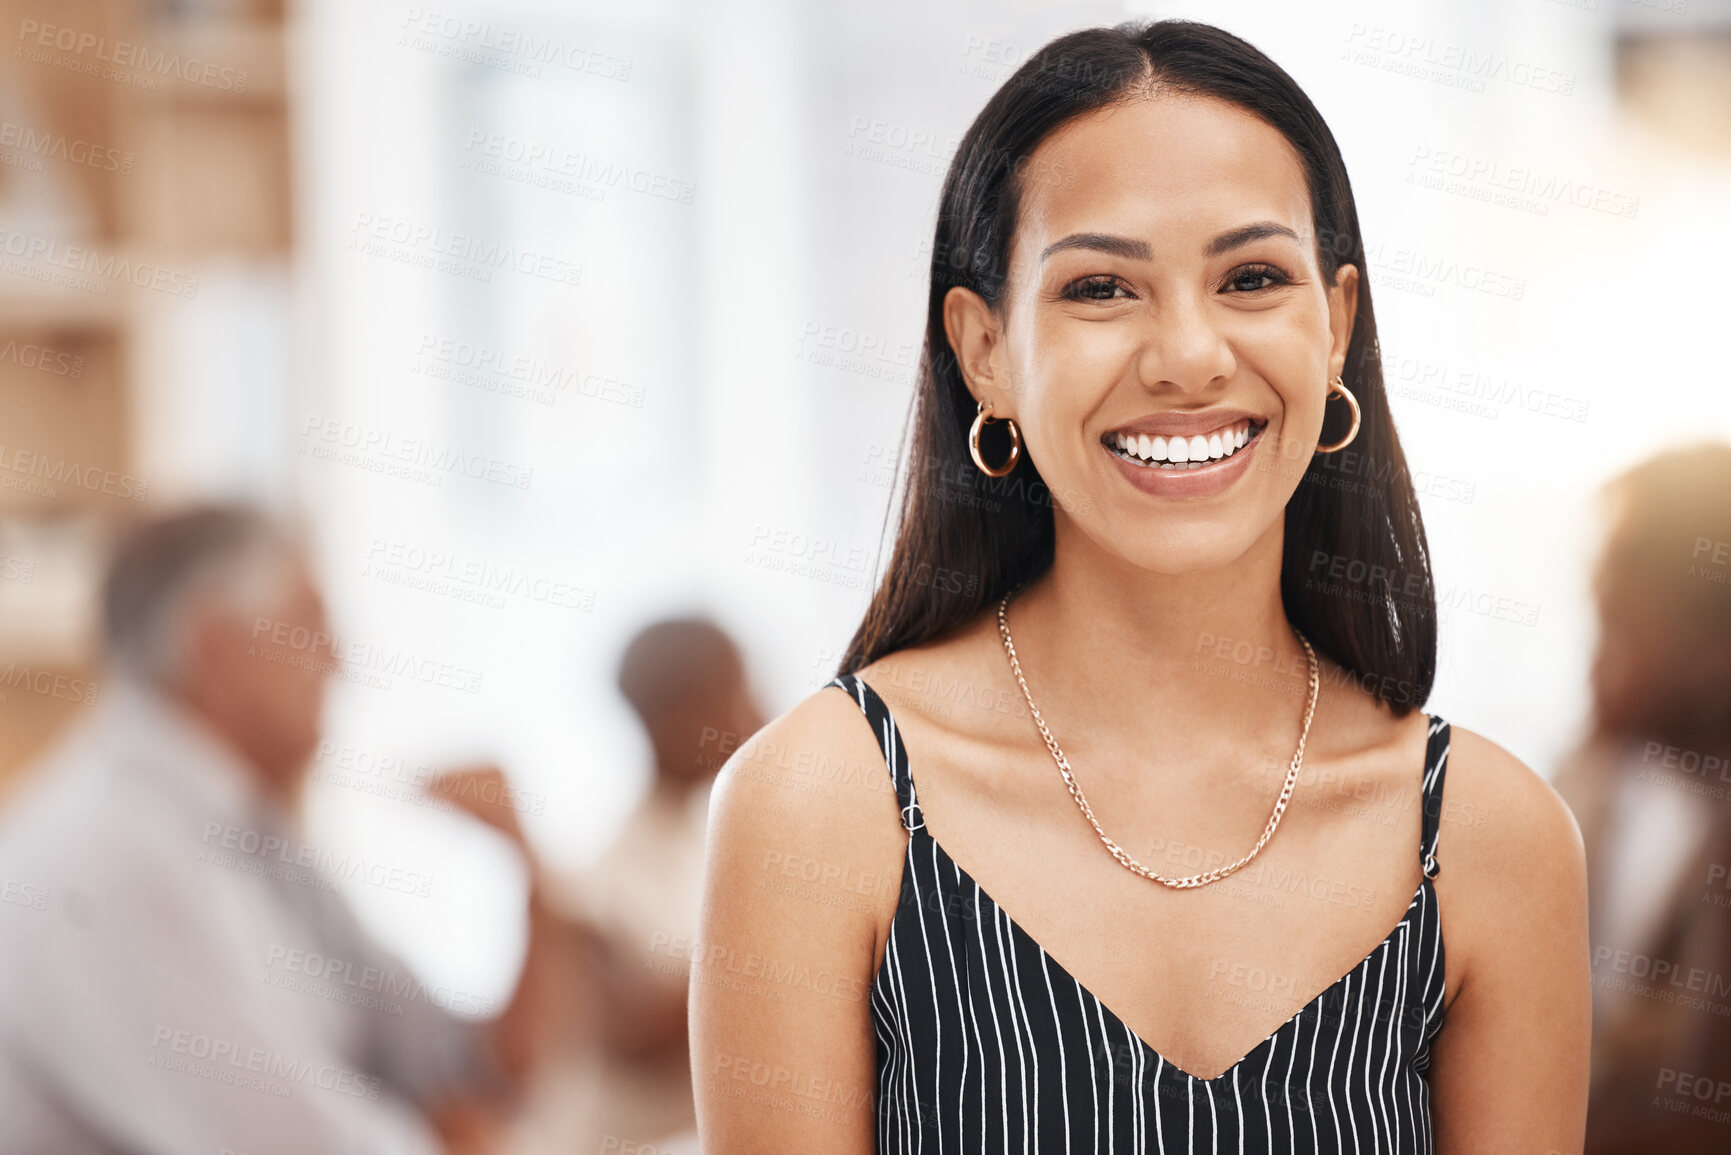 Buy stock photo Happy, smiling and a portrait of woman at work and coworkers in blurred background. Success, pride and confidence, businesswoman with smile in office. Leadership, management and empowerment of women.